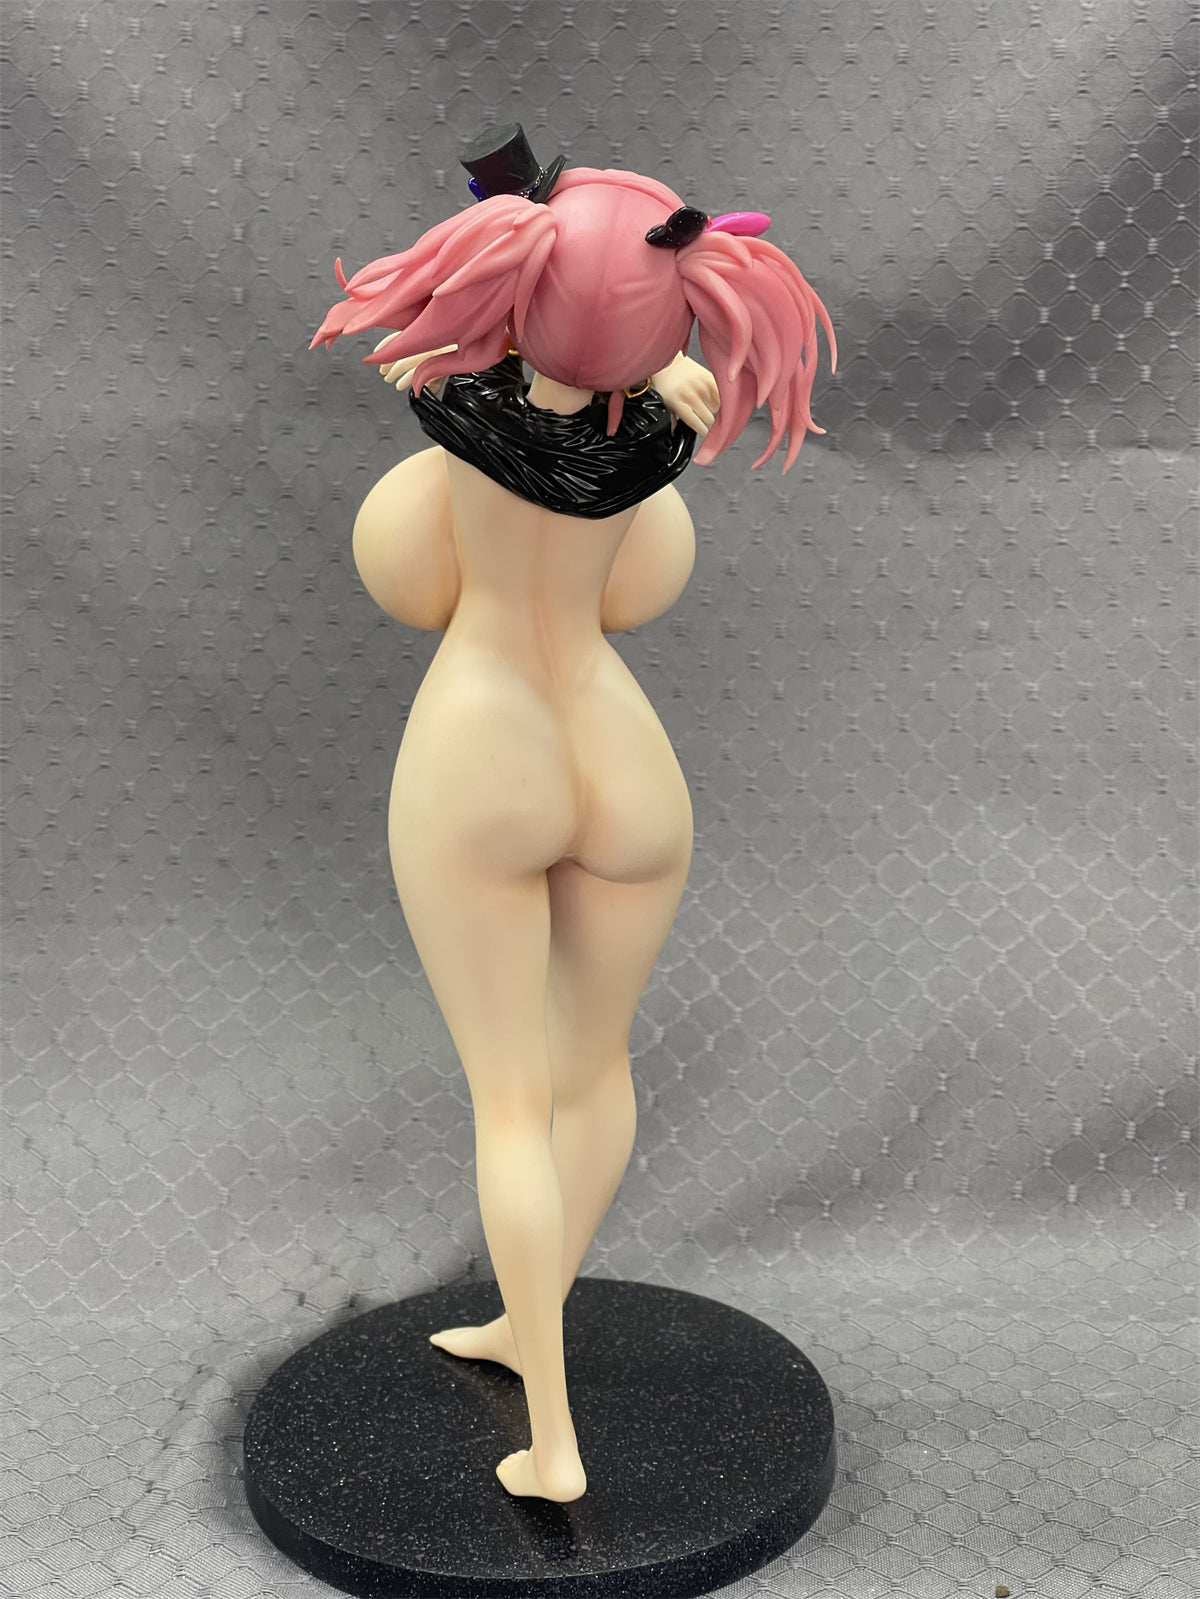 THE iDOLM@STER Cinderella Girls - Jougasaki Mika huge breast 1/6 naked anime figure sexy action figures